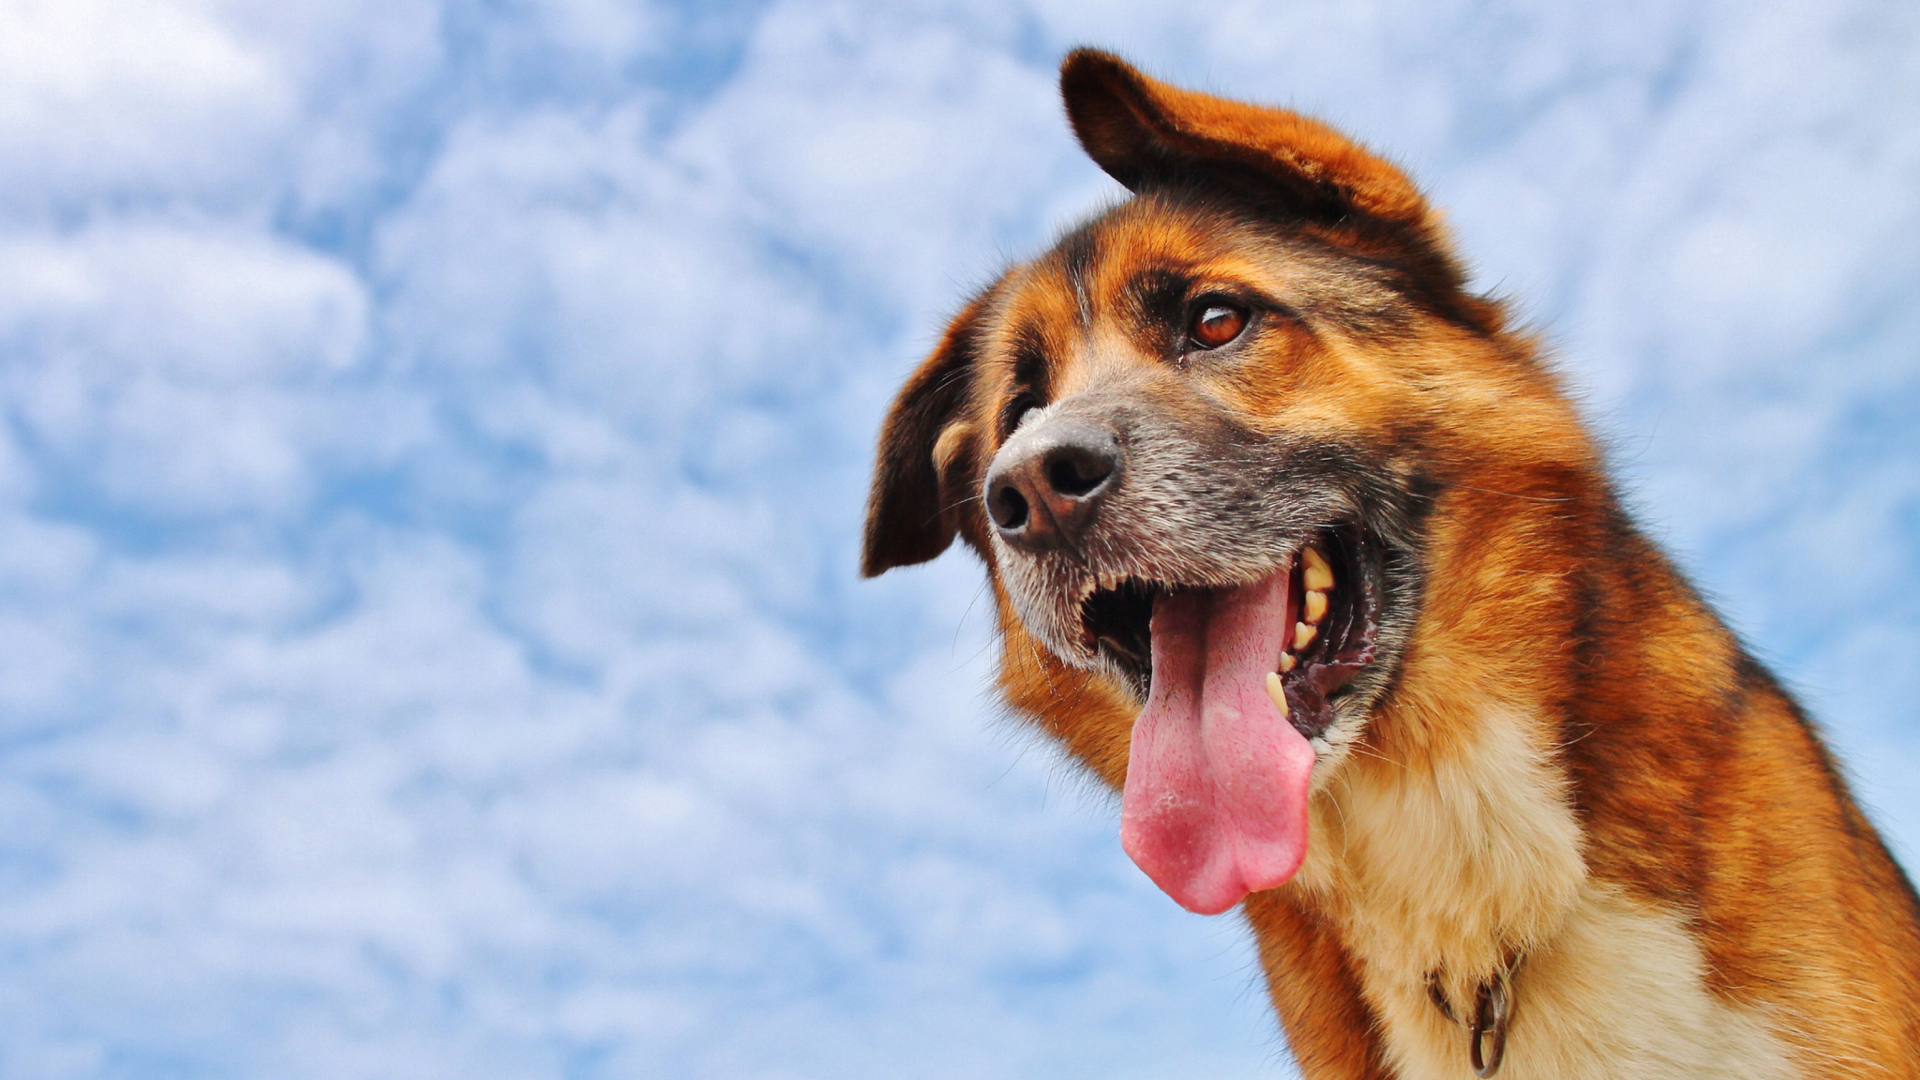 Happy Dog And Blue Sky wallpaper 1920x1080